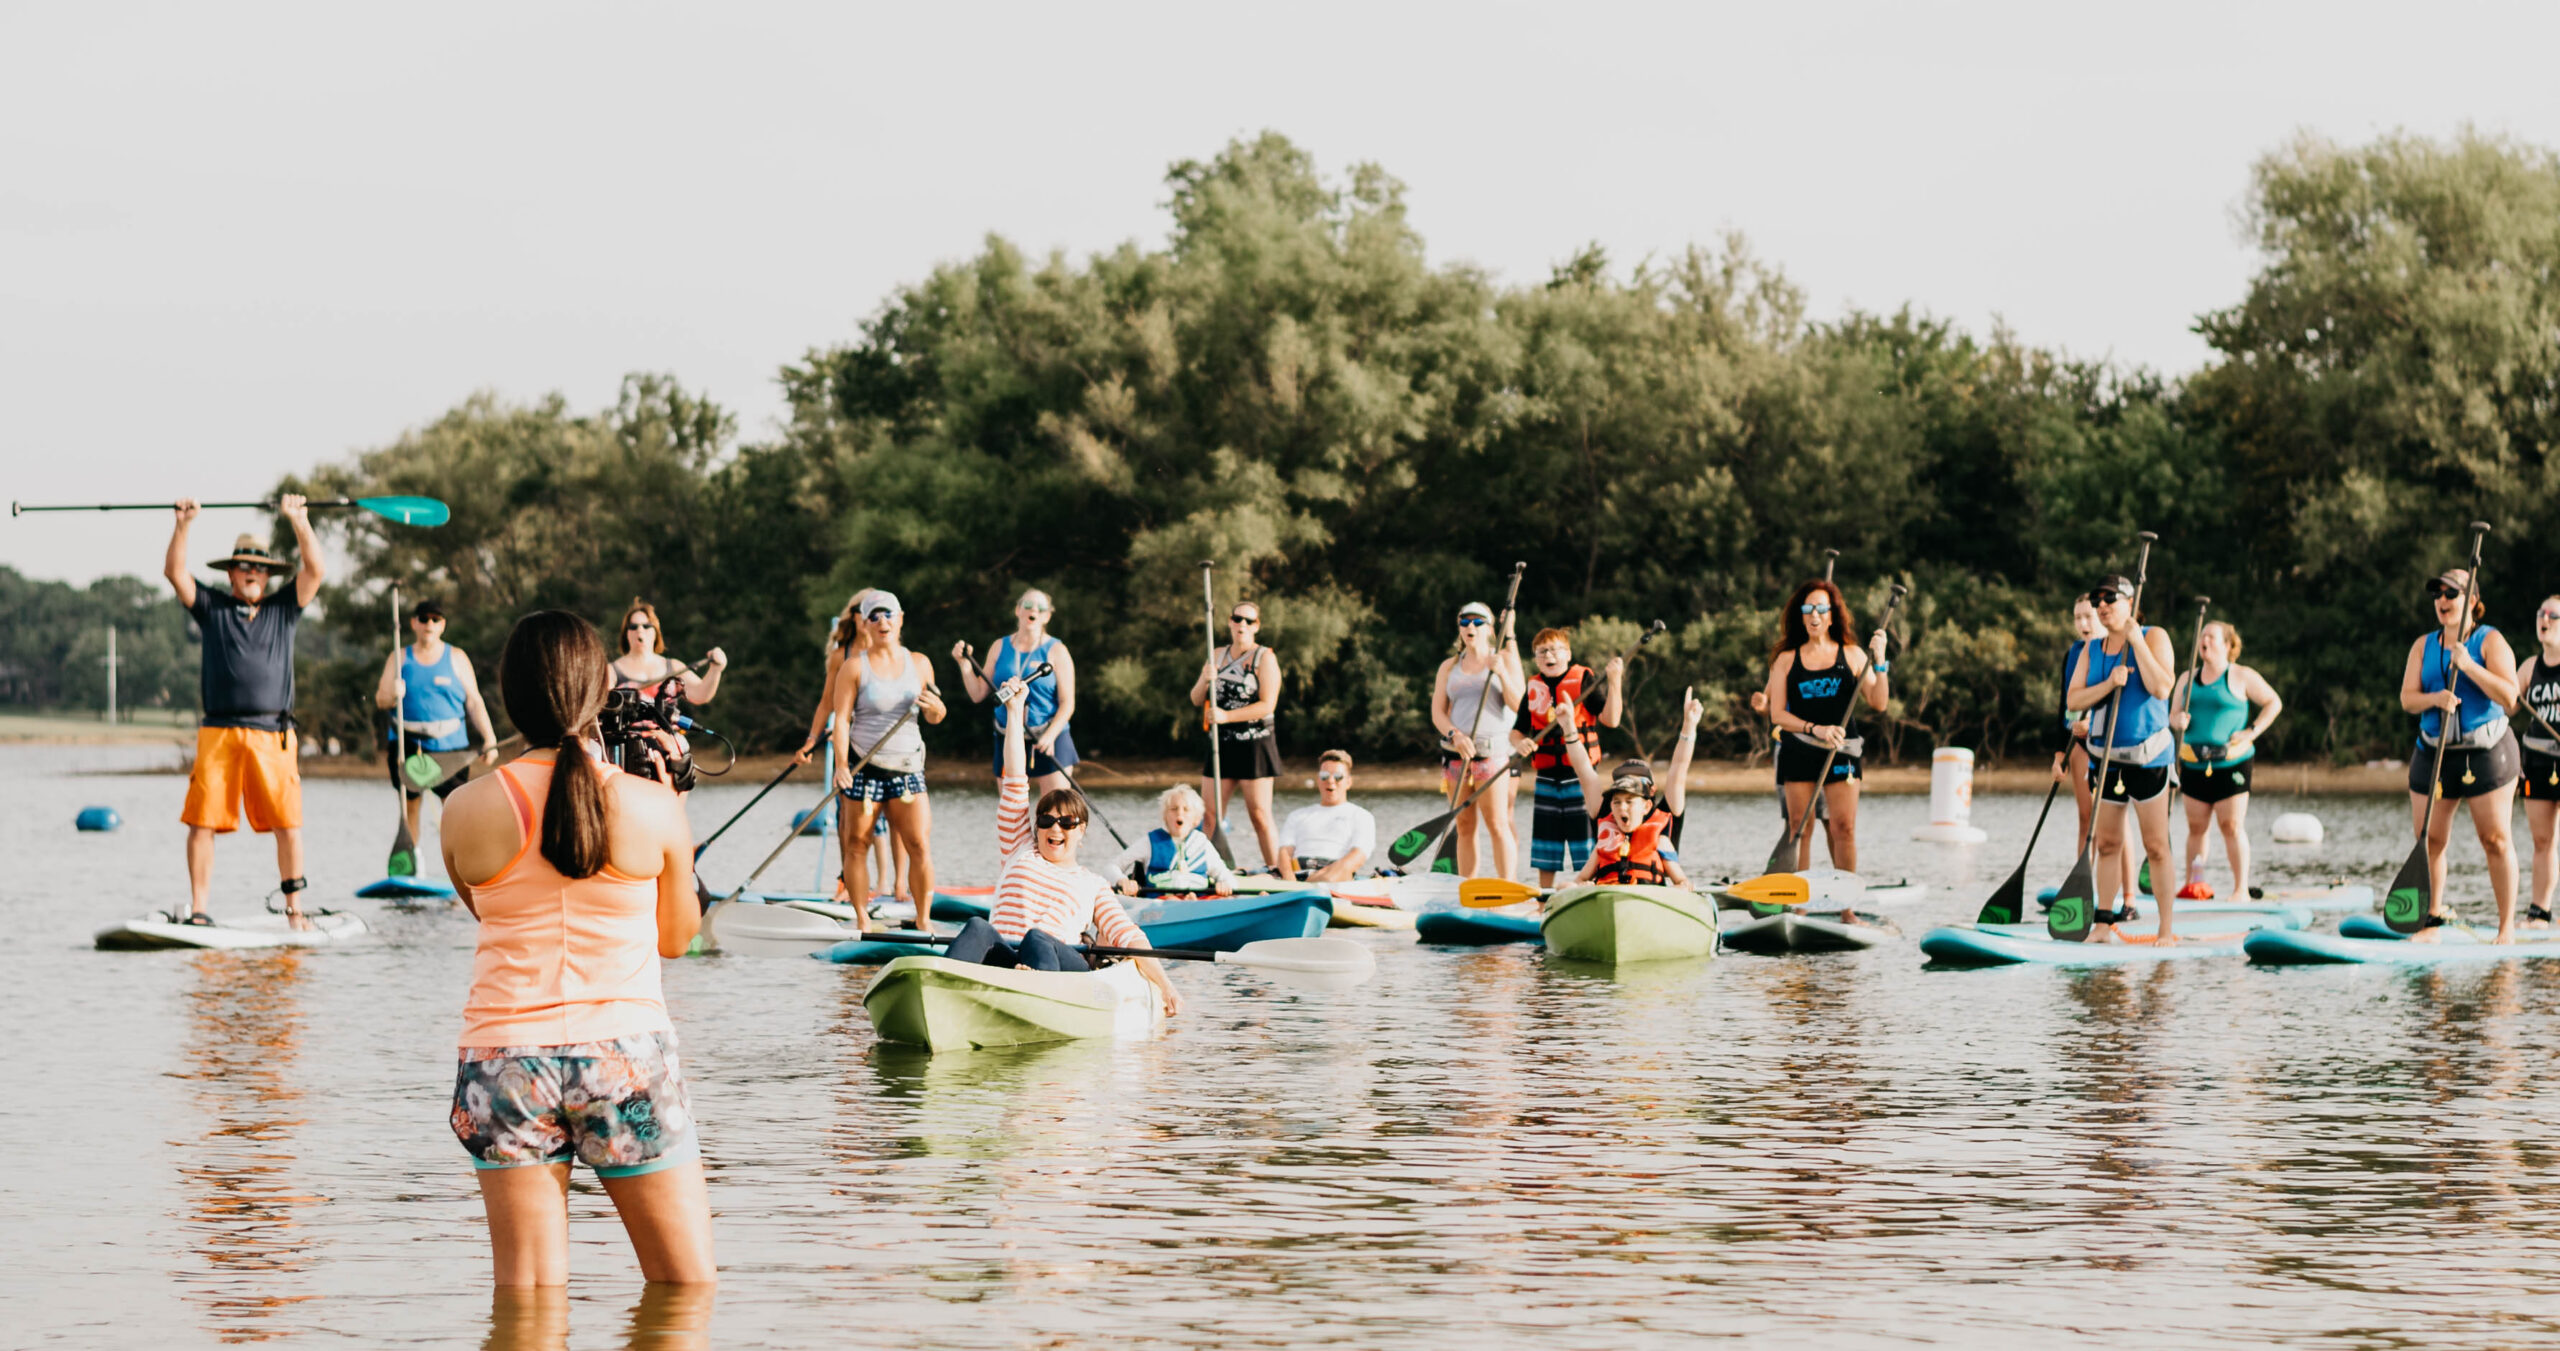 fun things to do in Little Elm - stand up paddleboarding at Lake Lewisville